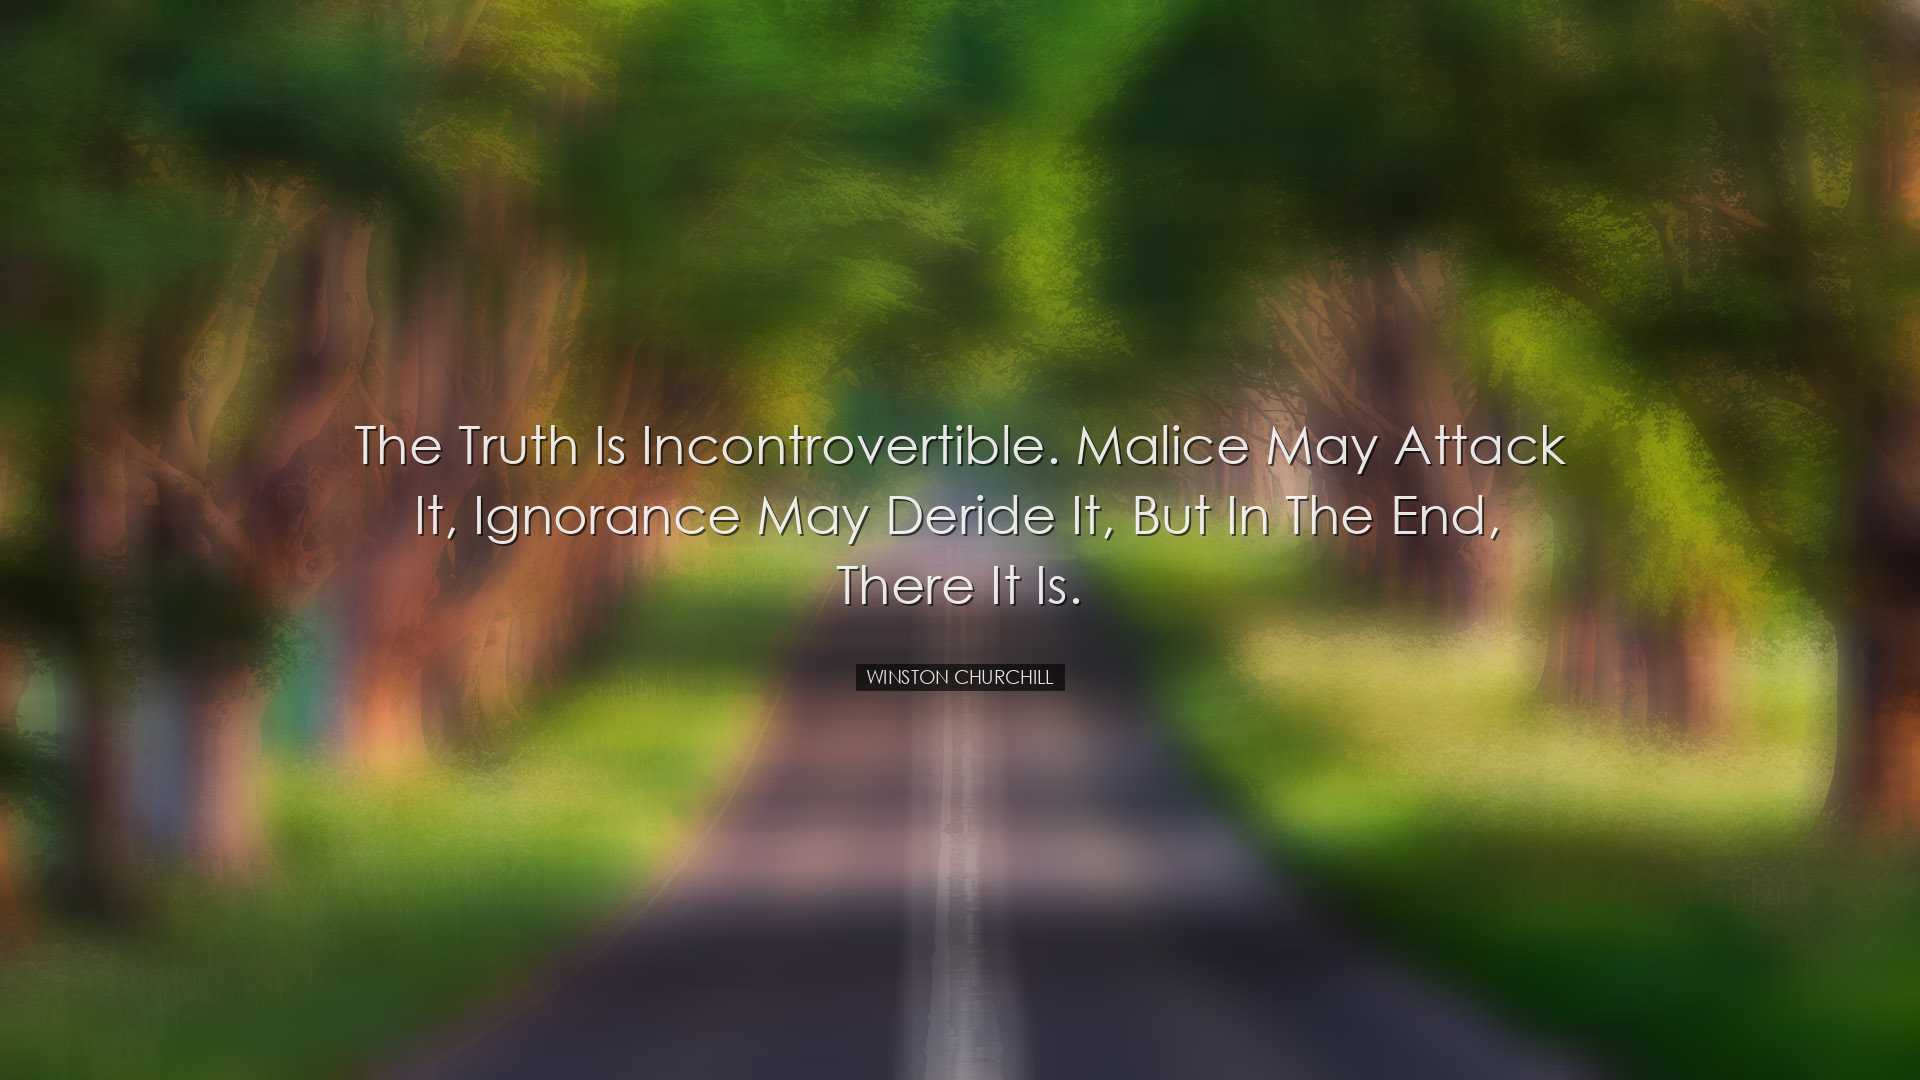 The truth is incontrovertible. Malice may attack it, ignorance may